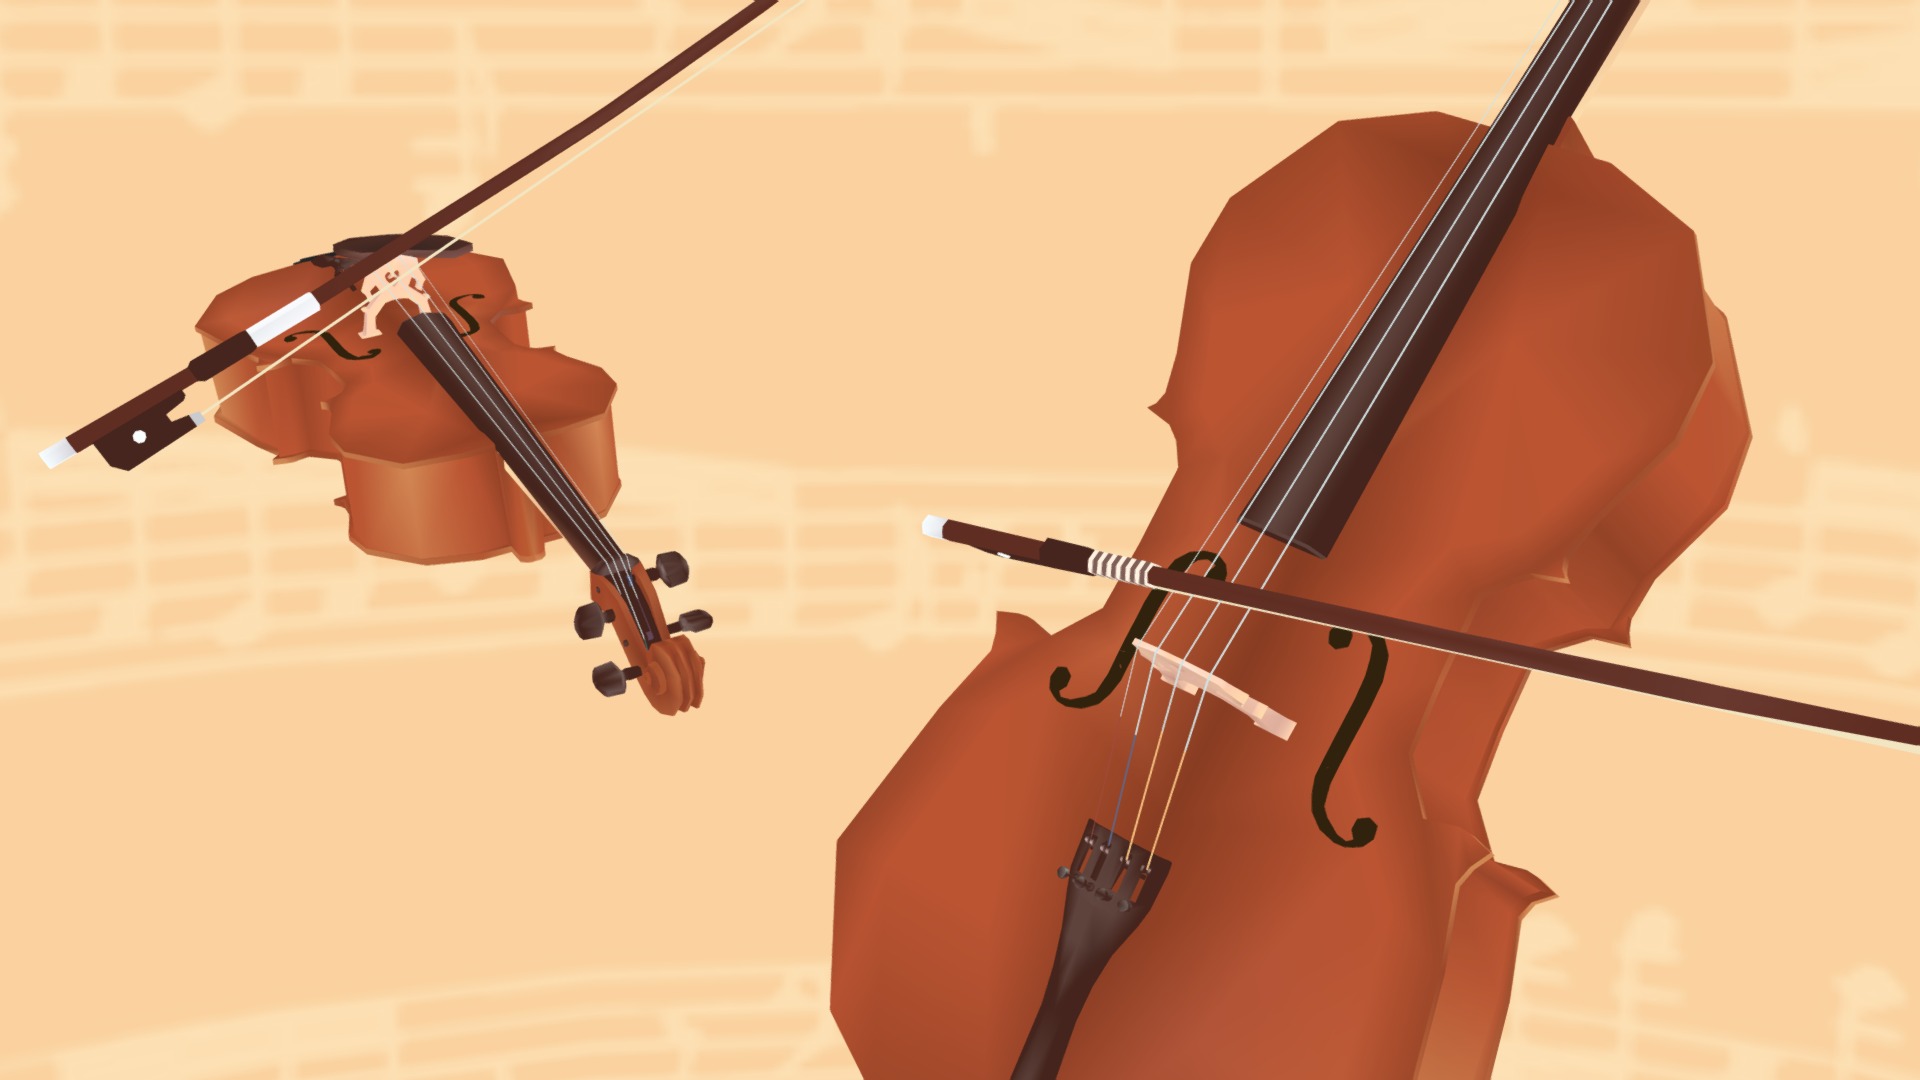 3D model Violin & cello - This is a 3D model of the Violin & cello. The 3D model is about a person playing a violin.